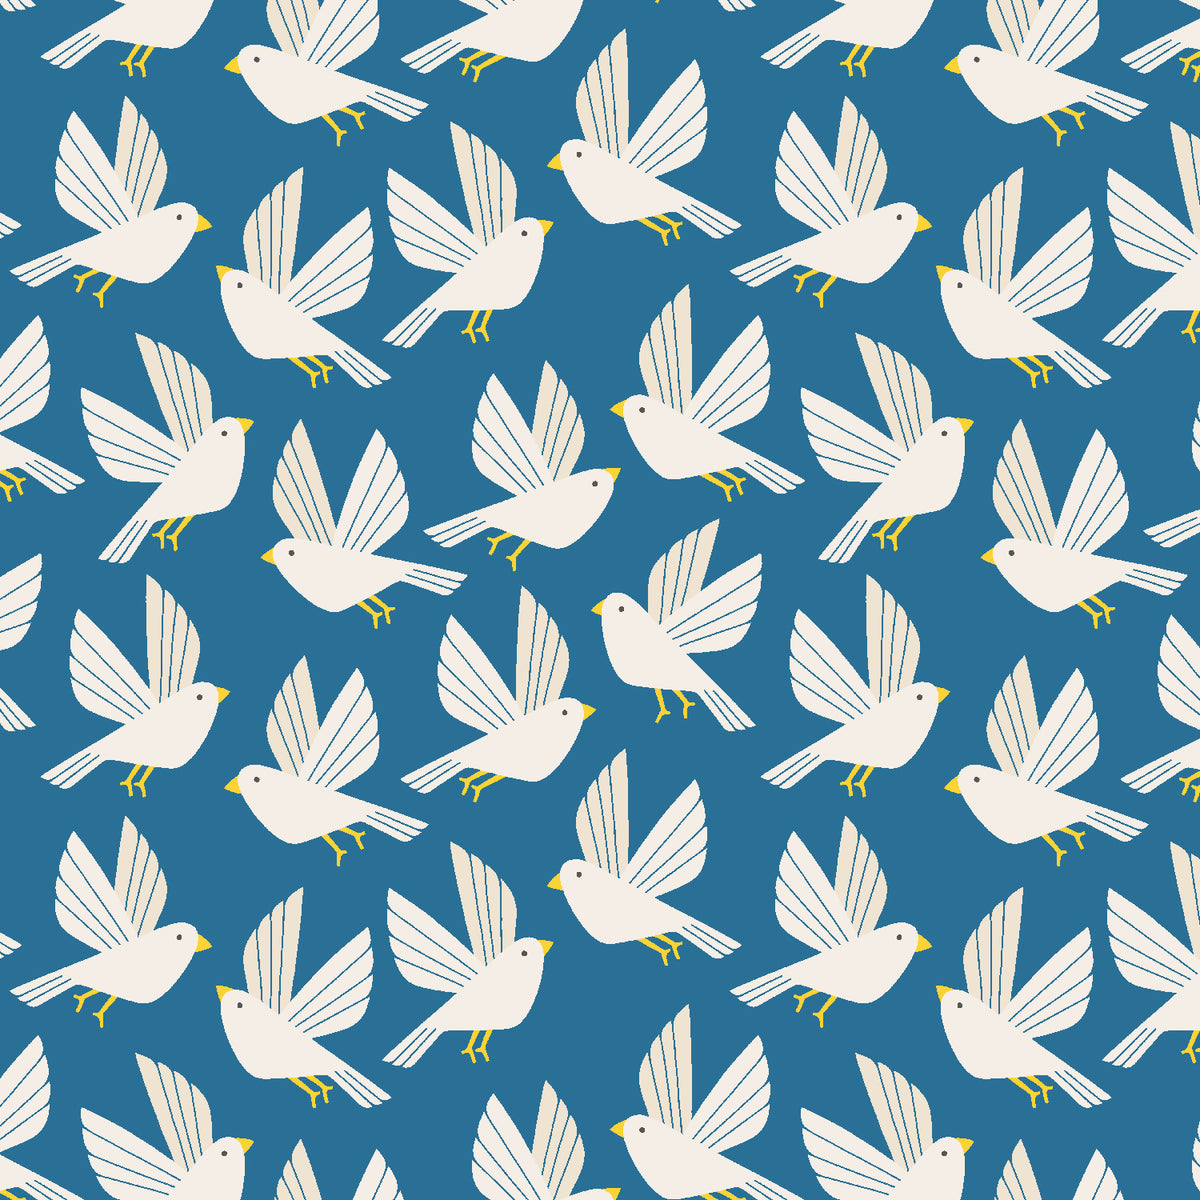 Wild and Free Quilt Fabric - Free as a Bird in Rocky Mountain Sky Blue - LV601-RM1